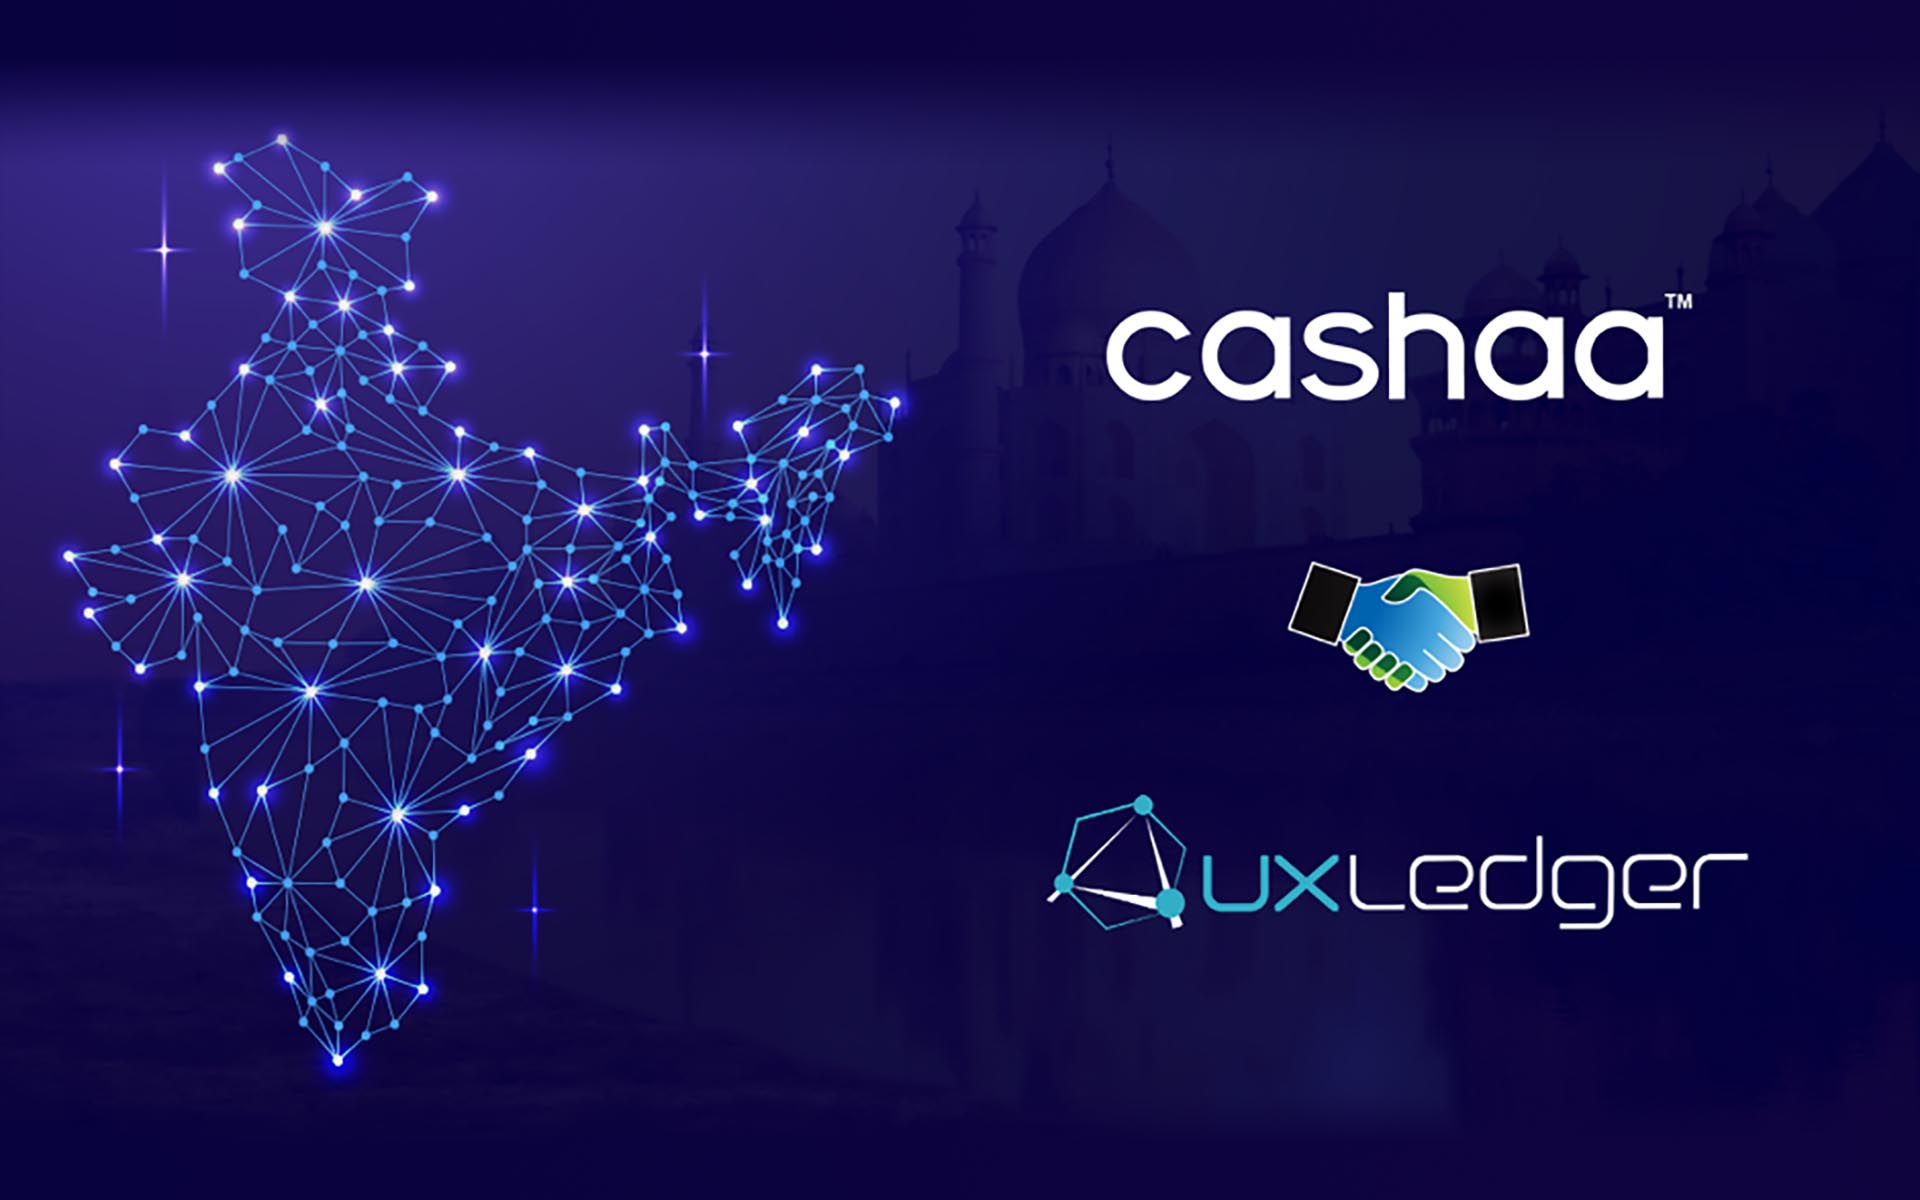 India’s Largest Blockchain Network, Auxledger, Backs Cashaa for All India Operations